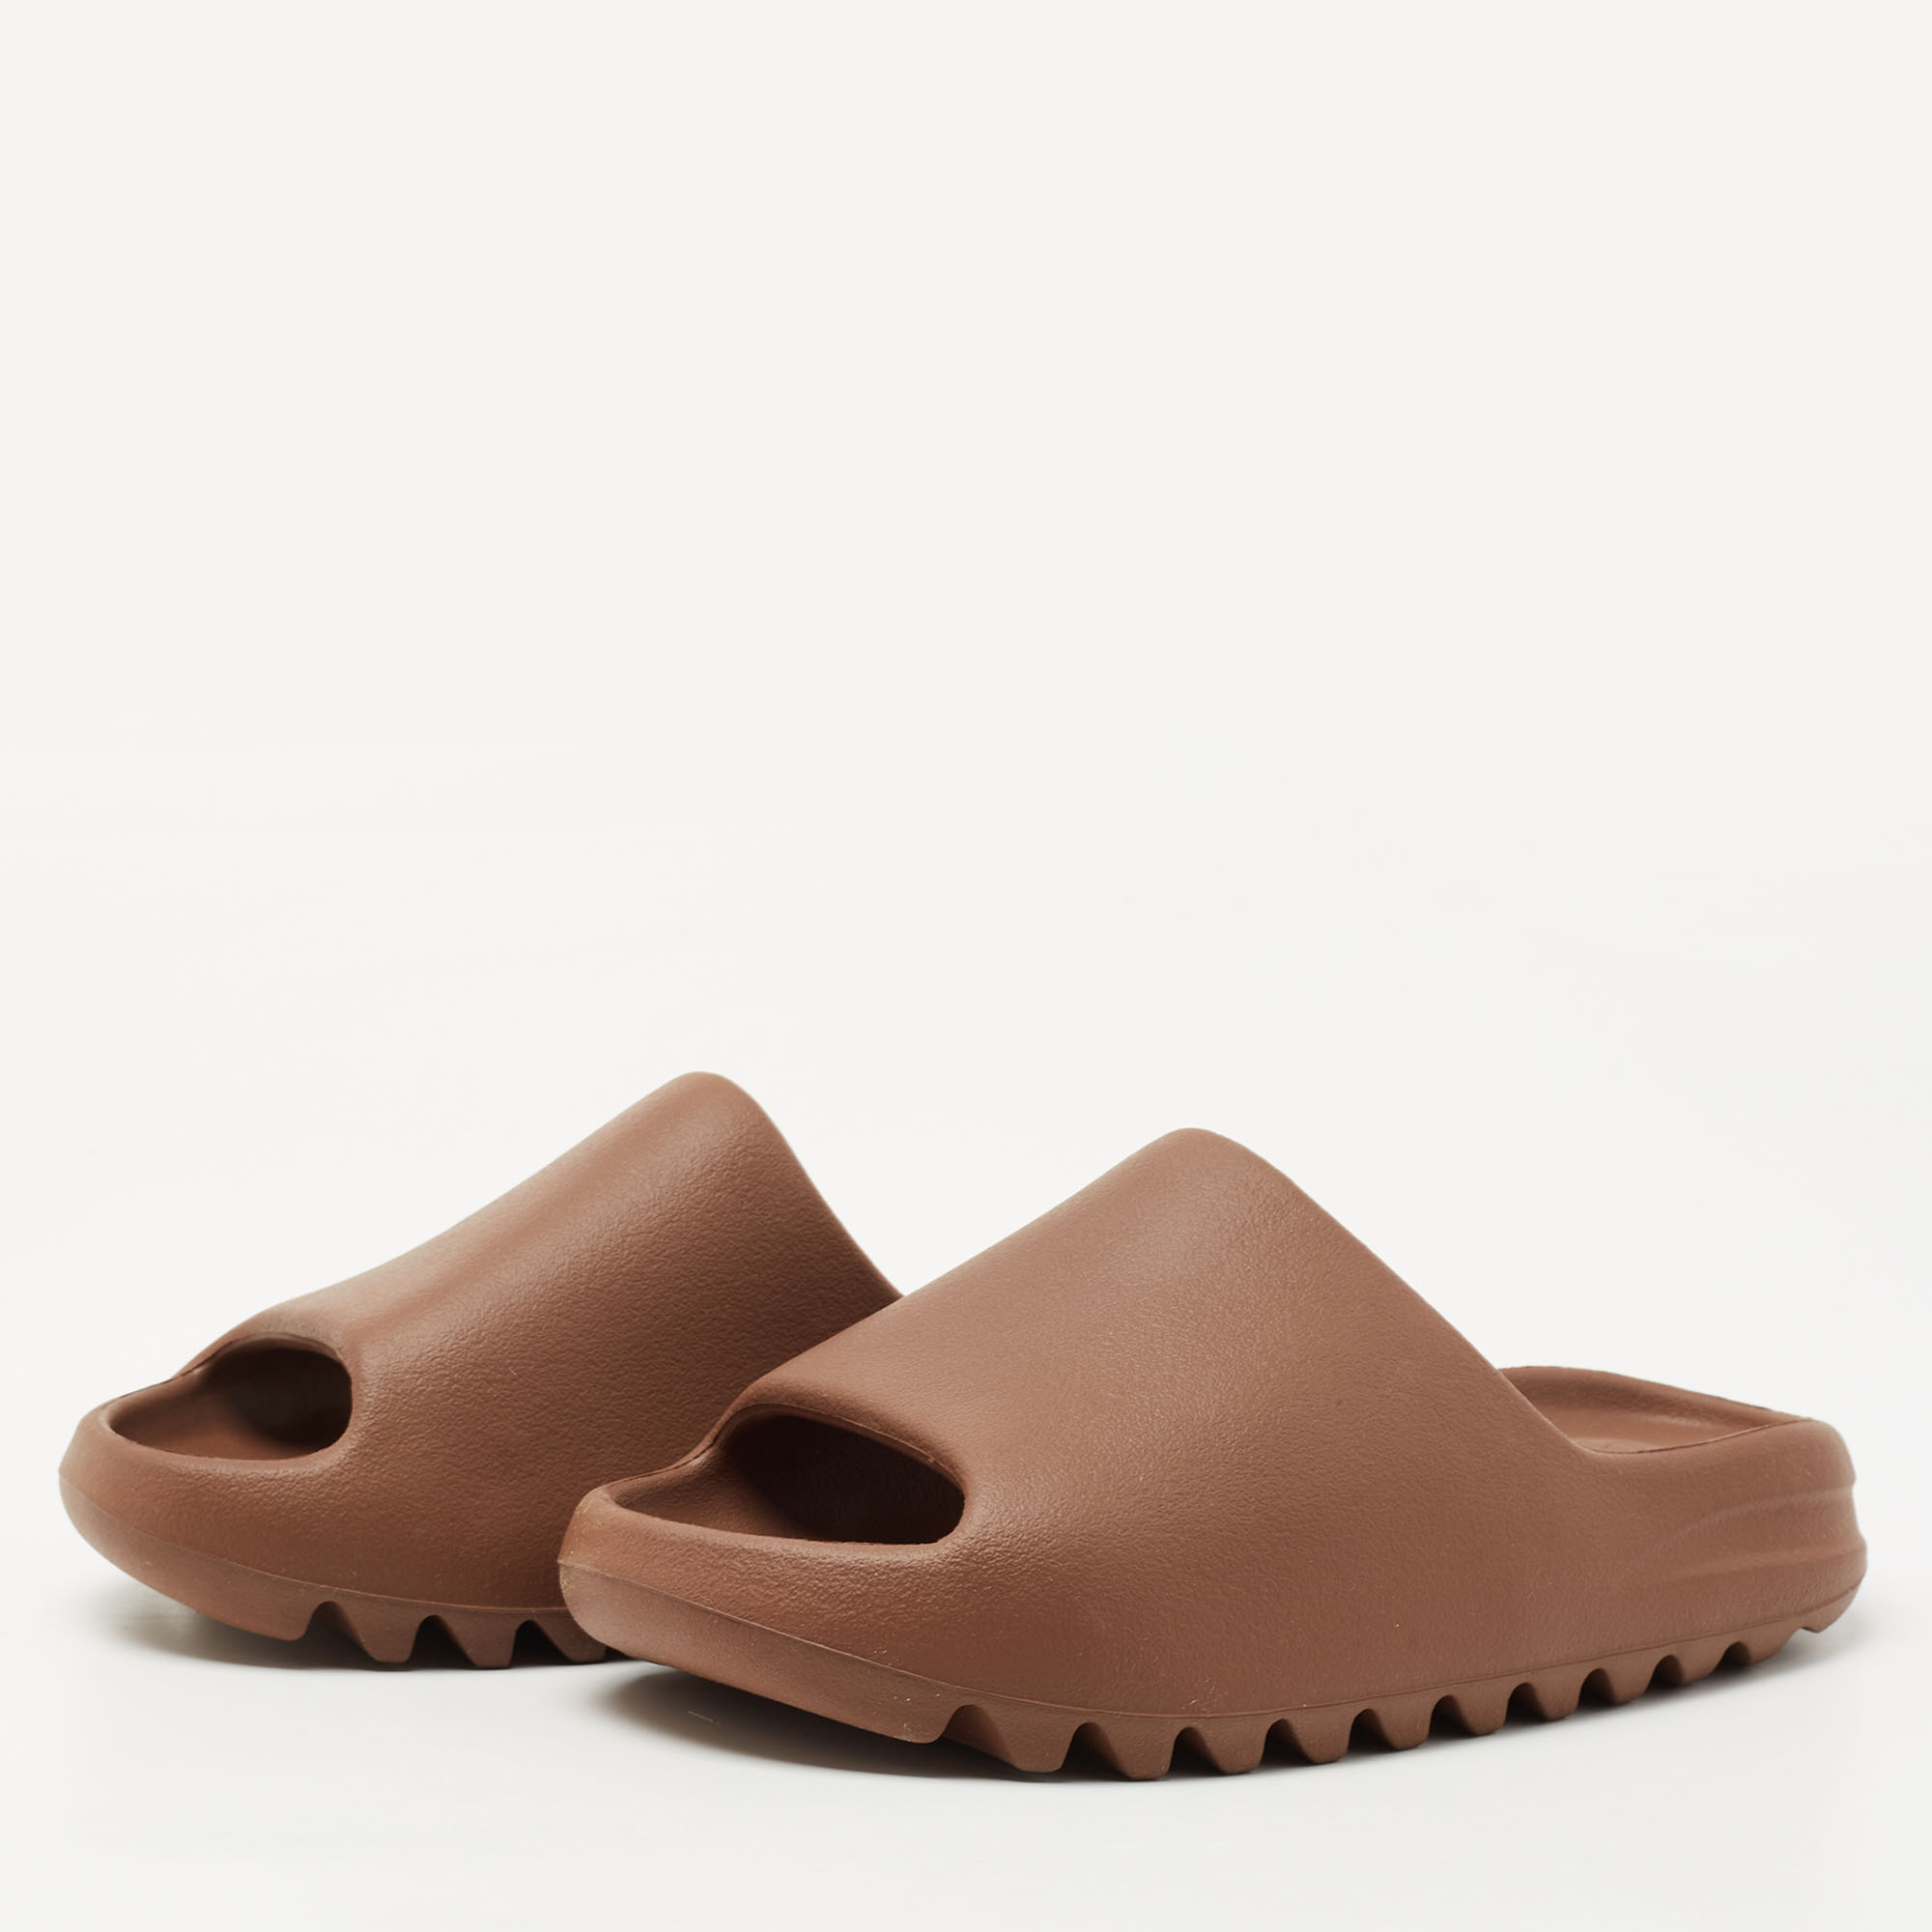 

Yeezy x Adidas Brown Rubber Flax Slides Size